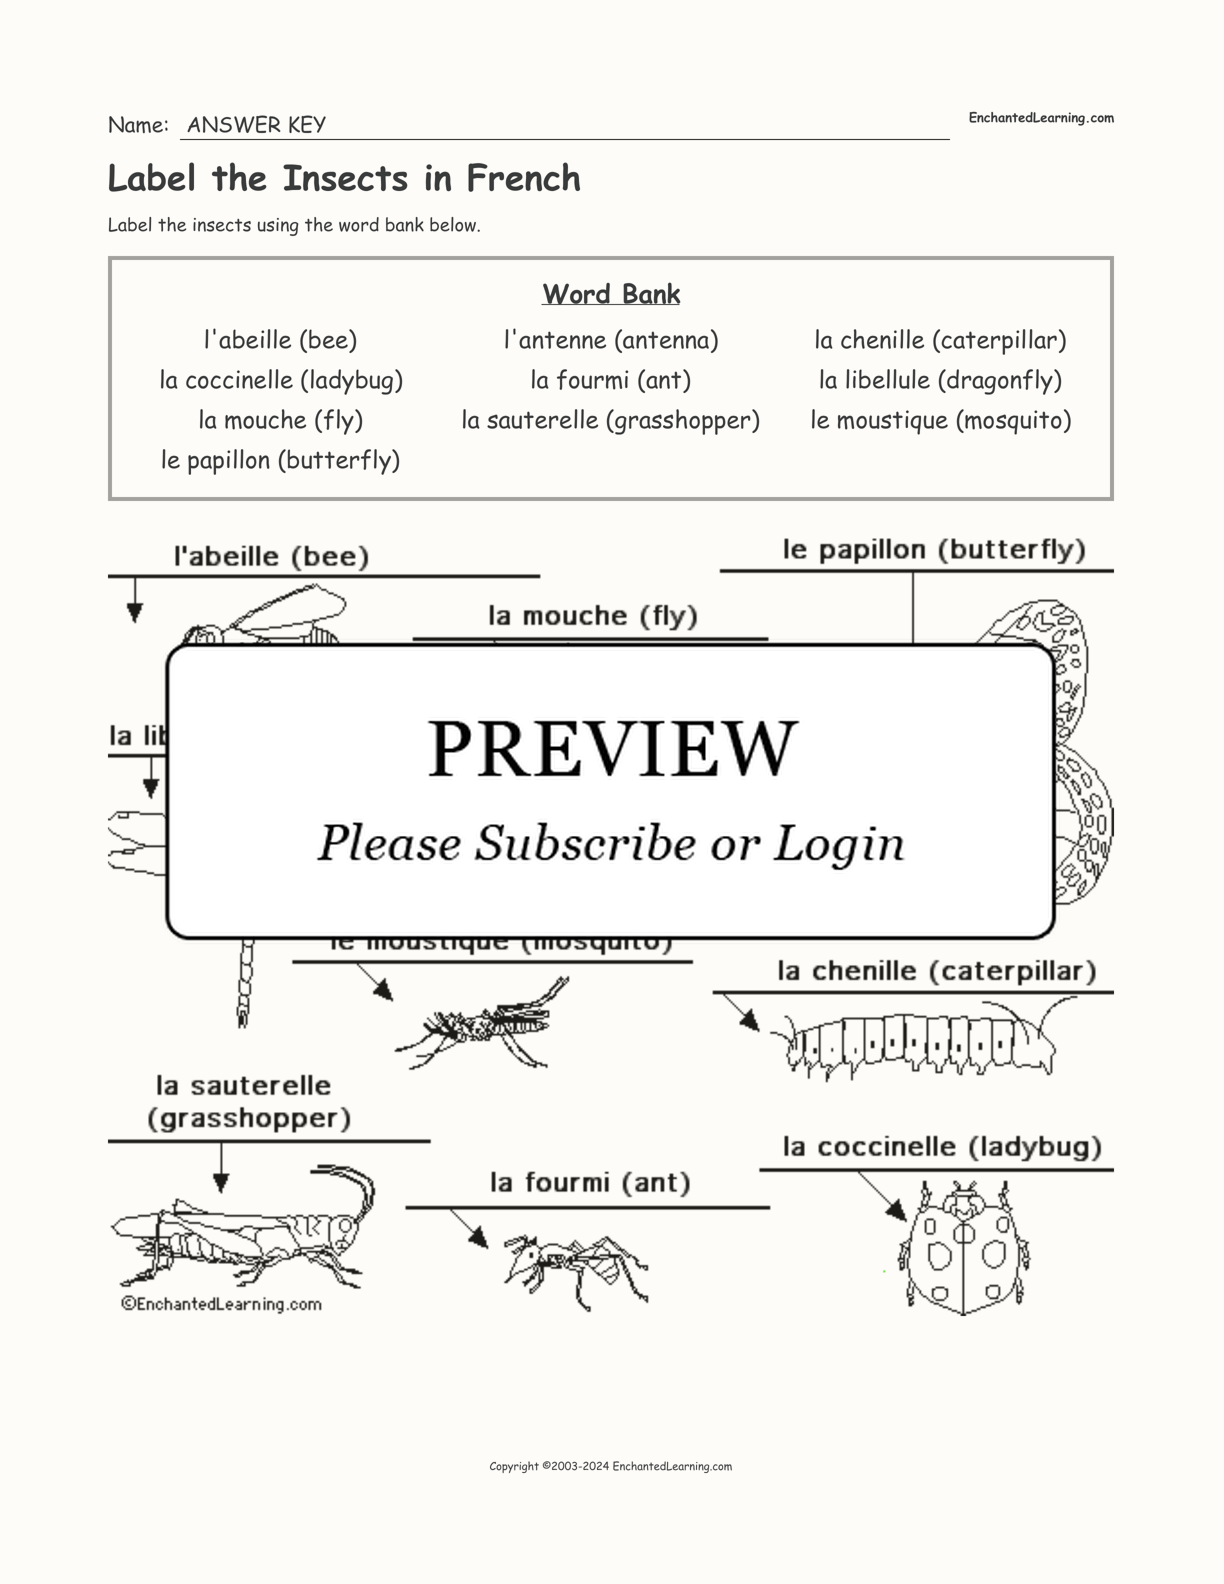 Label the Insects in French interactive worksheet page 2